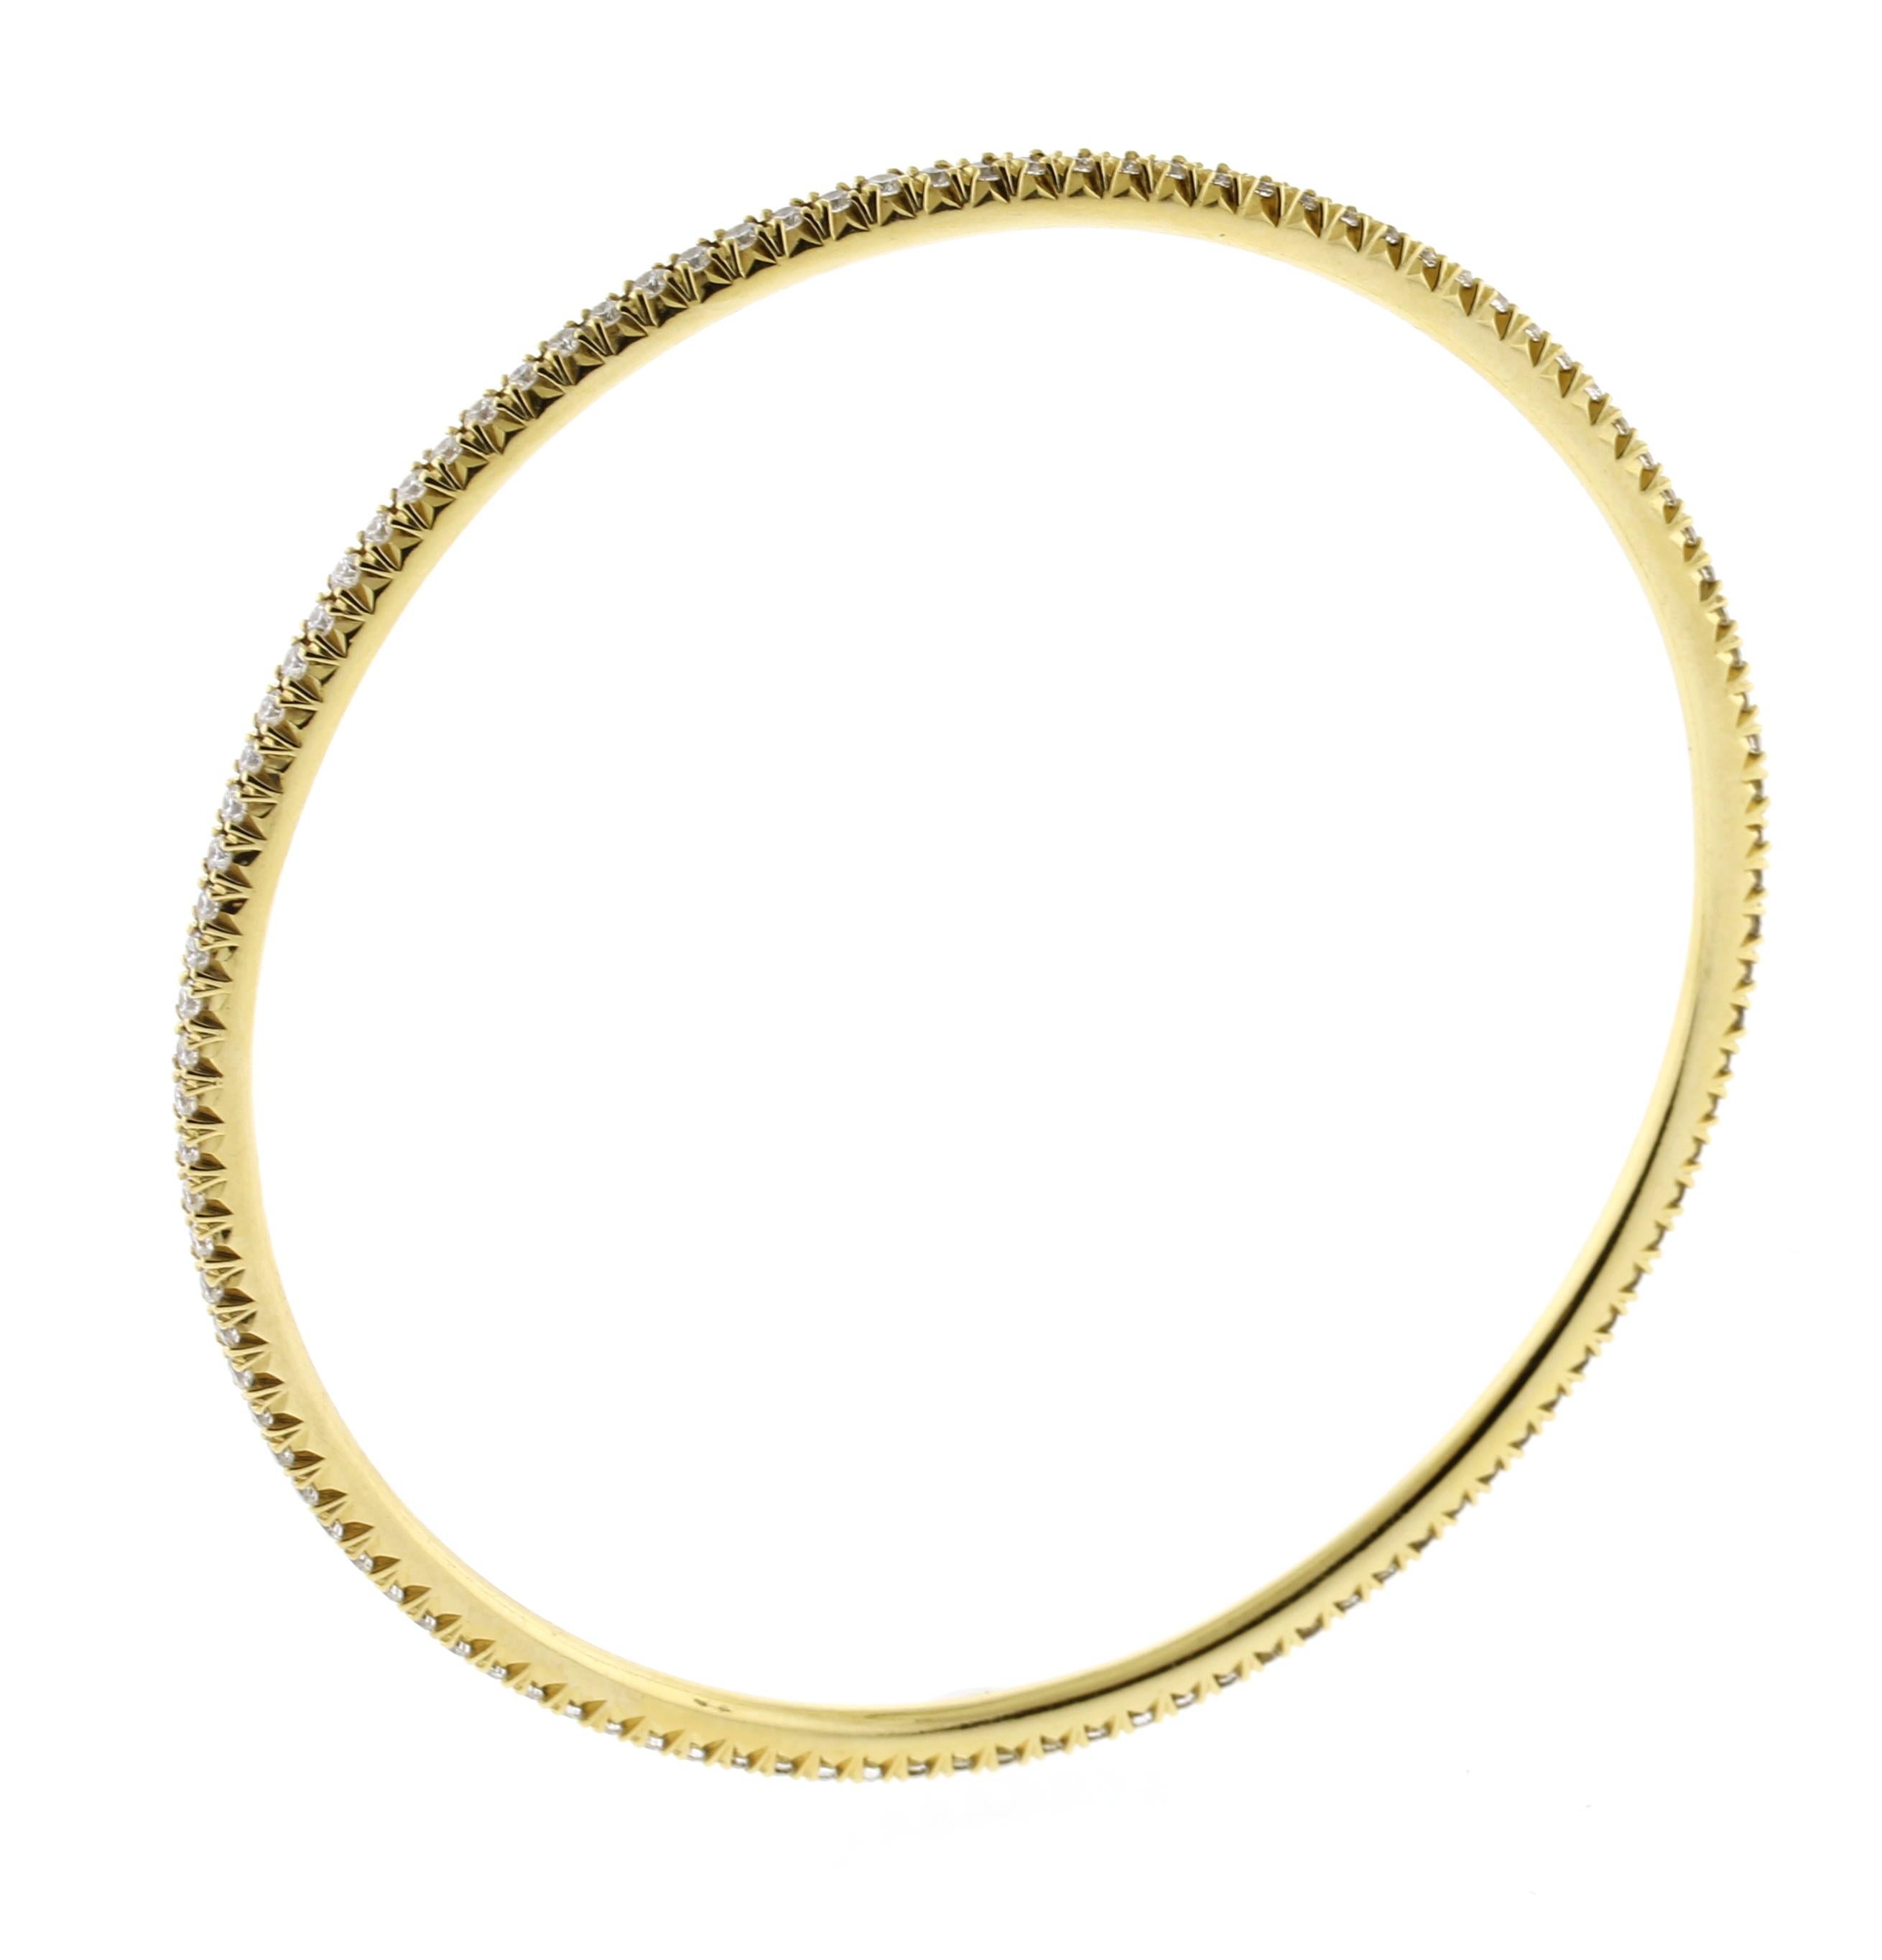 From Tiffany & Co, this 18 karat gold bangle bracelet with diamonds is from the Metro collection.
• Metal: 18kt Yellow Gold
• Circa: 2020s
• Gemstone: 104Diamonds=.65 carats
• Dimensions: 2 3/8 circumference
• Packaging: Tiffany pouch
• Condition: